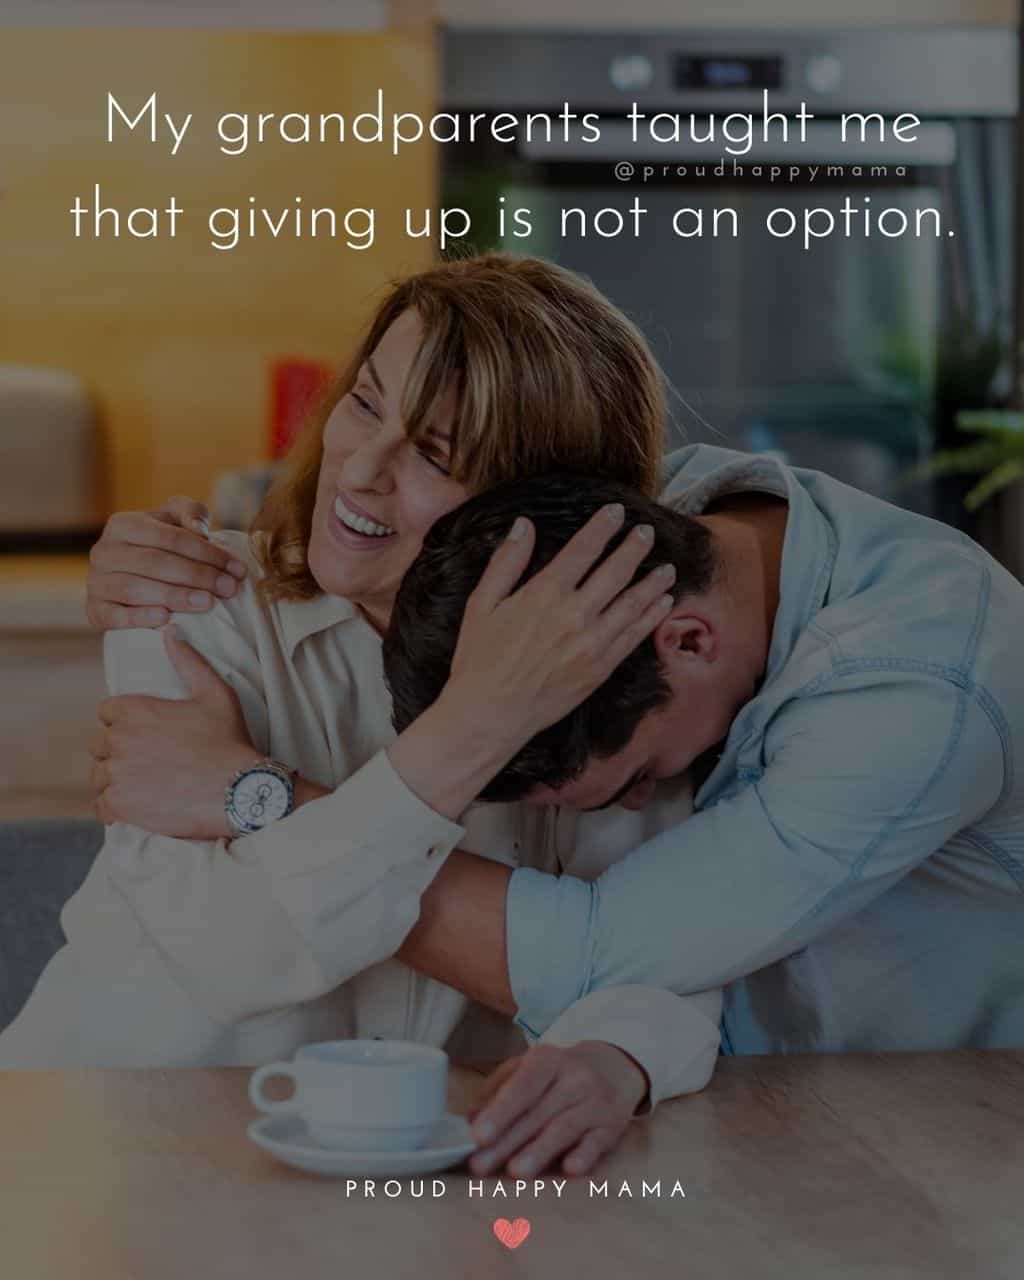 Grandparent Quotes – My grandparents taught me that giving up is not an option.’